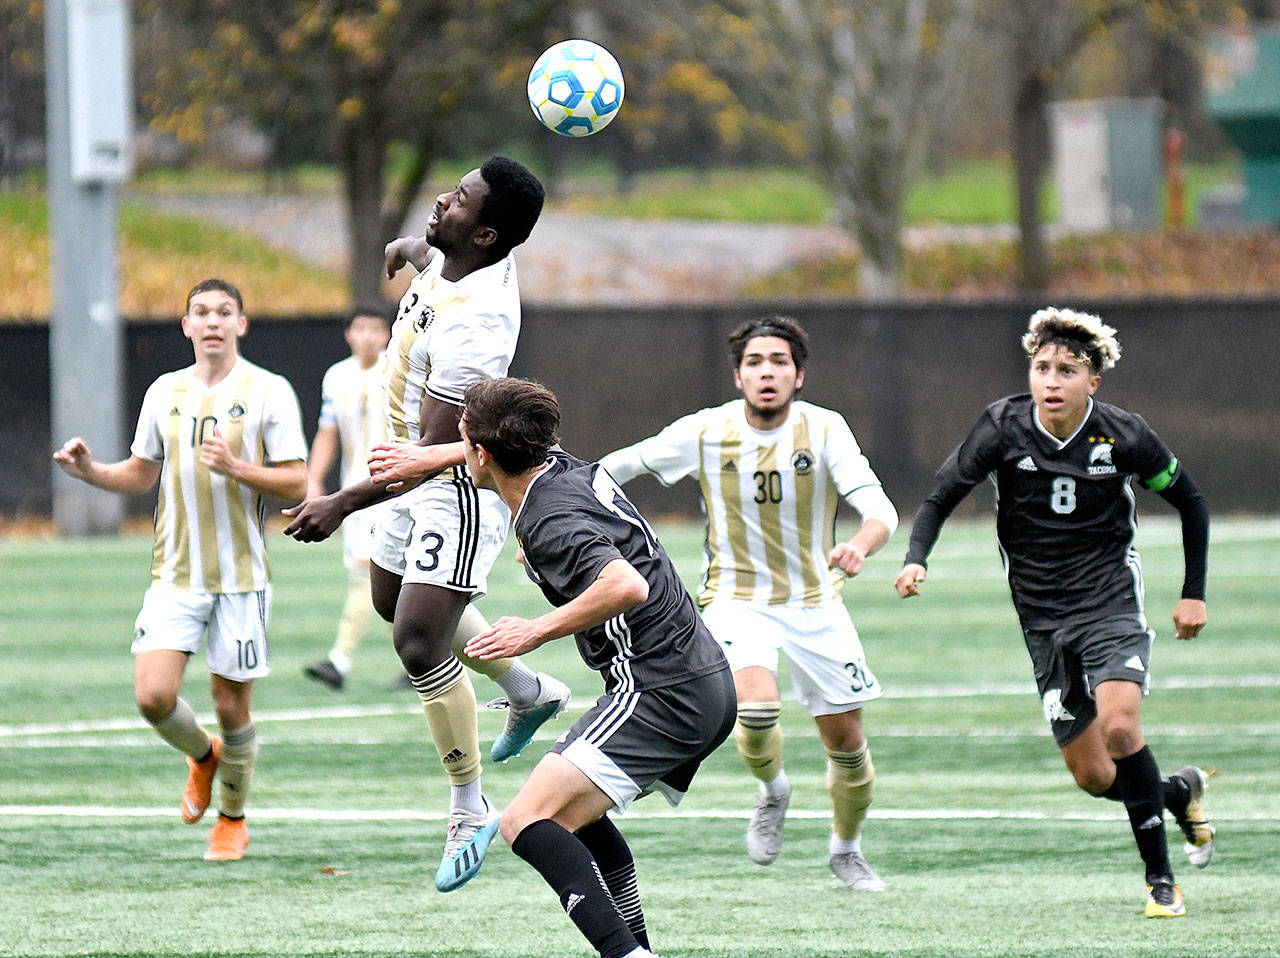 Peninsula’s Theodore Baiye heads a ball against Tacoma in the NWAC championship match Sunday. The Pirates won in 3-1 in penalty kicks after the game ended in a 1-1 tie. Also in on the play are the Pirates’ Mason Haubrich (10) and Jonathan De Motta (30). (Photo courtesy of Peninsula College)